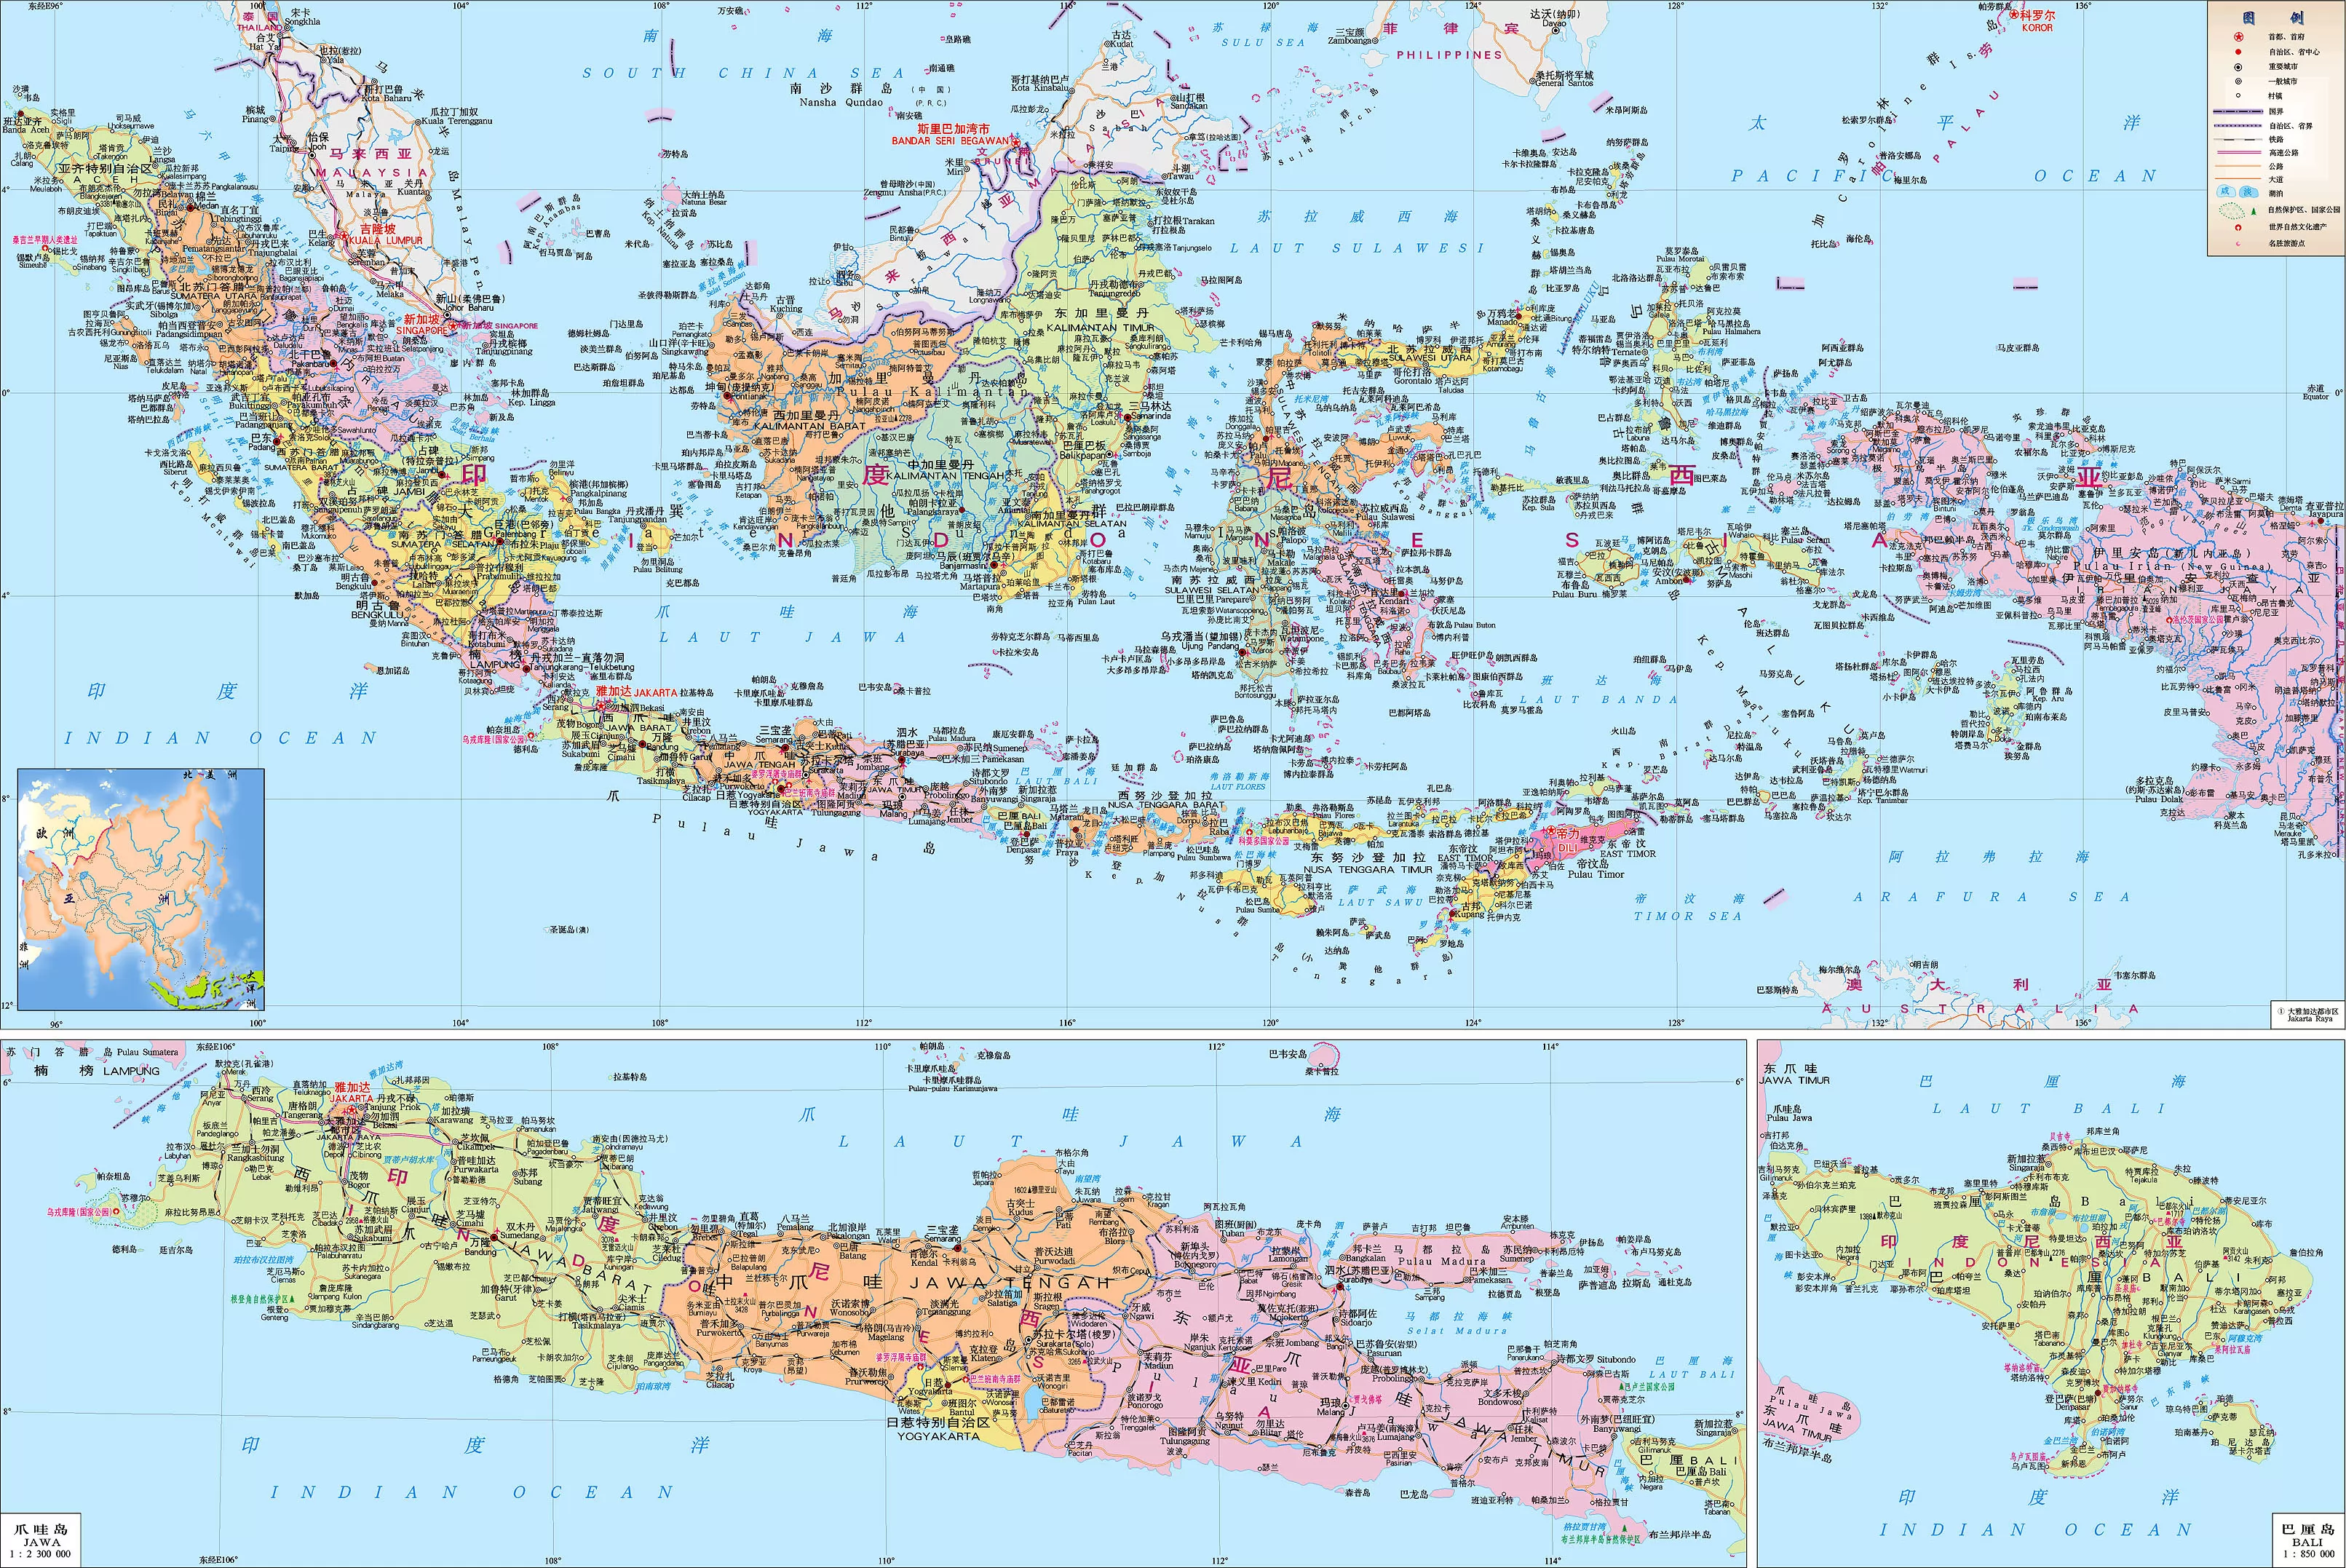 1Up Travel - Maps of Indonesia.Indonesia [Shaded Relief Map] U.S. Central Intelligence Agency ...